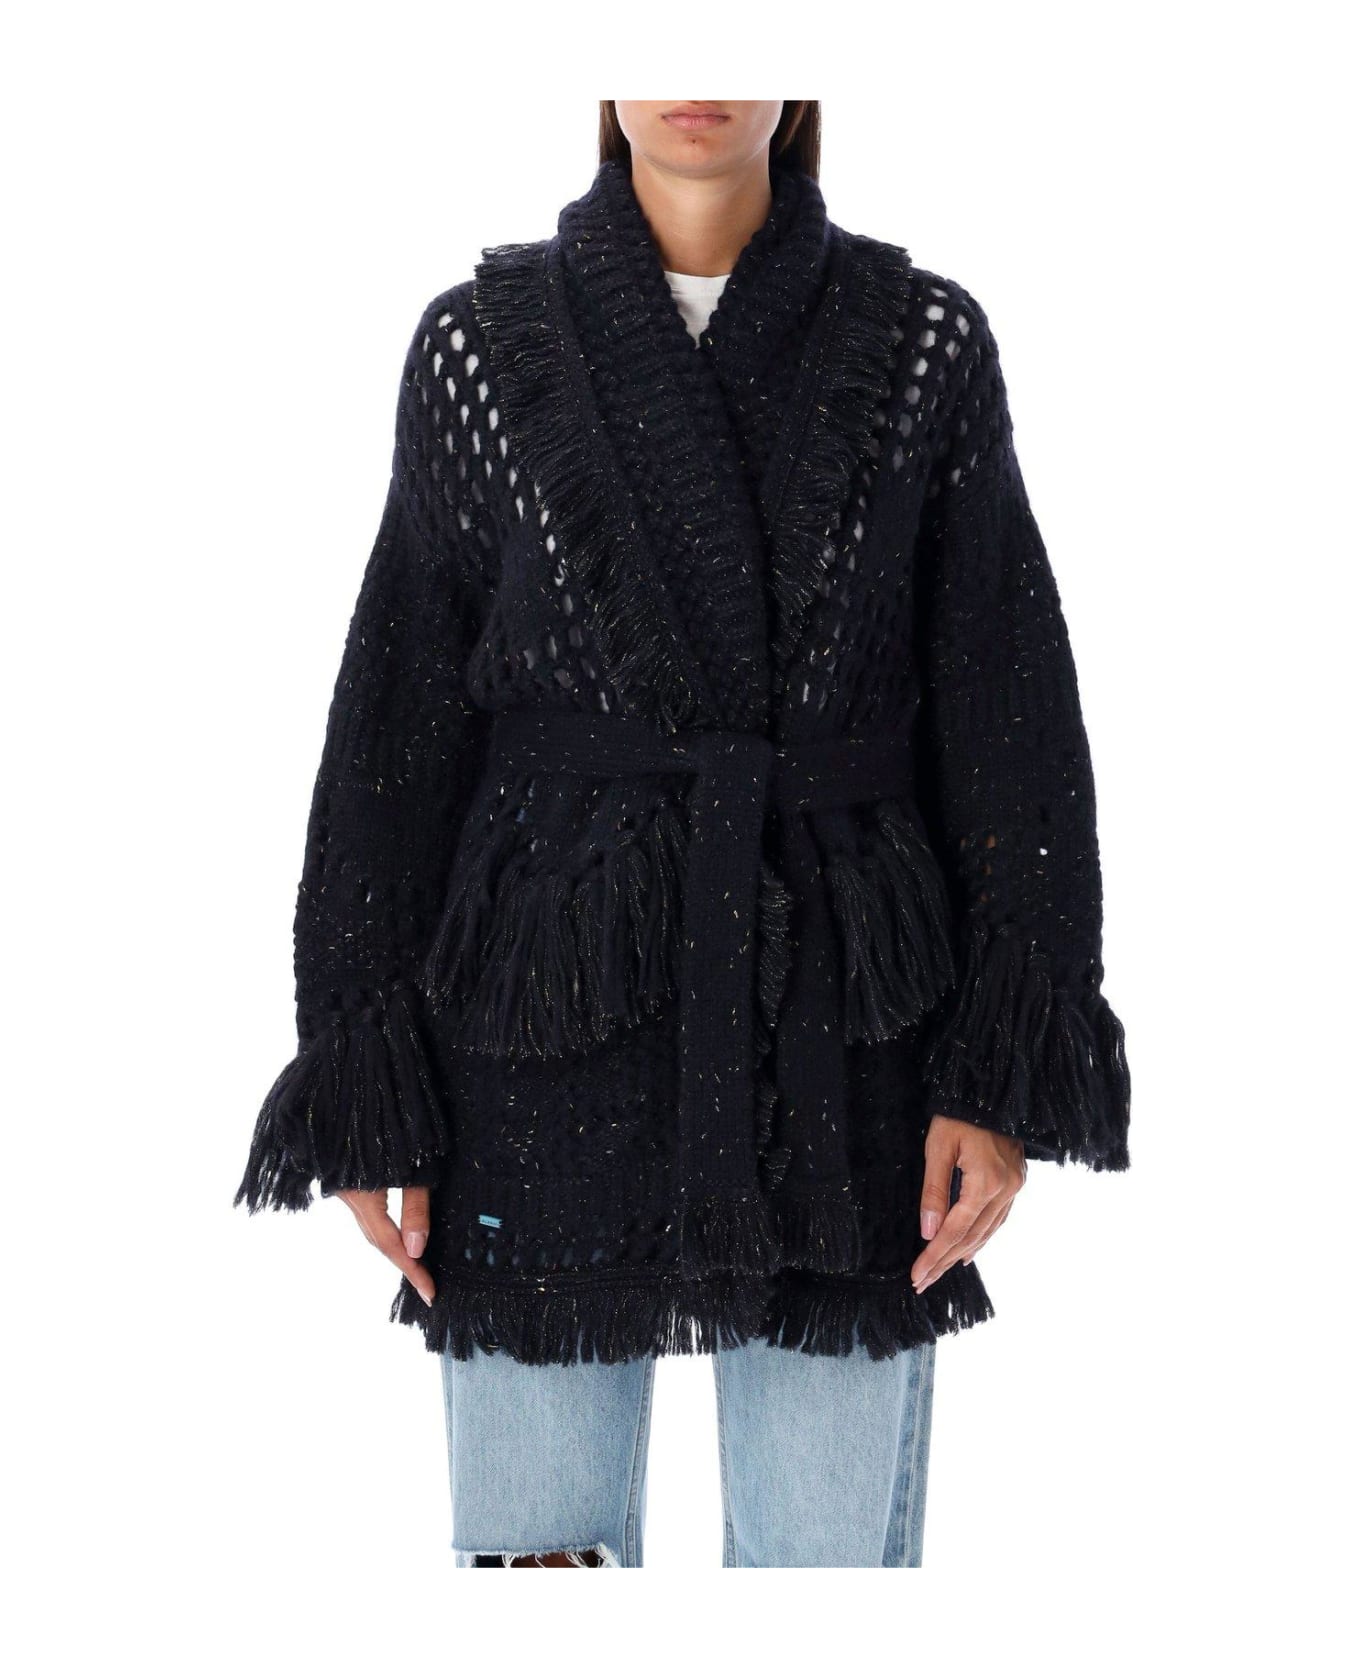 Alanui The Astral Speckle Knitted Fringed Cardigan - Blu